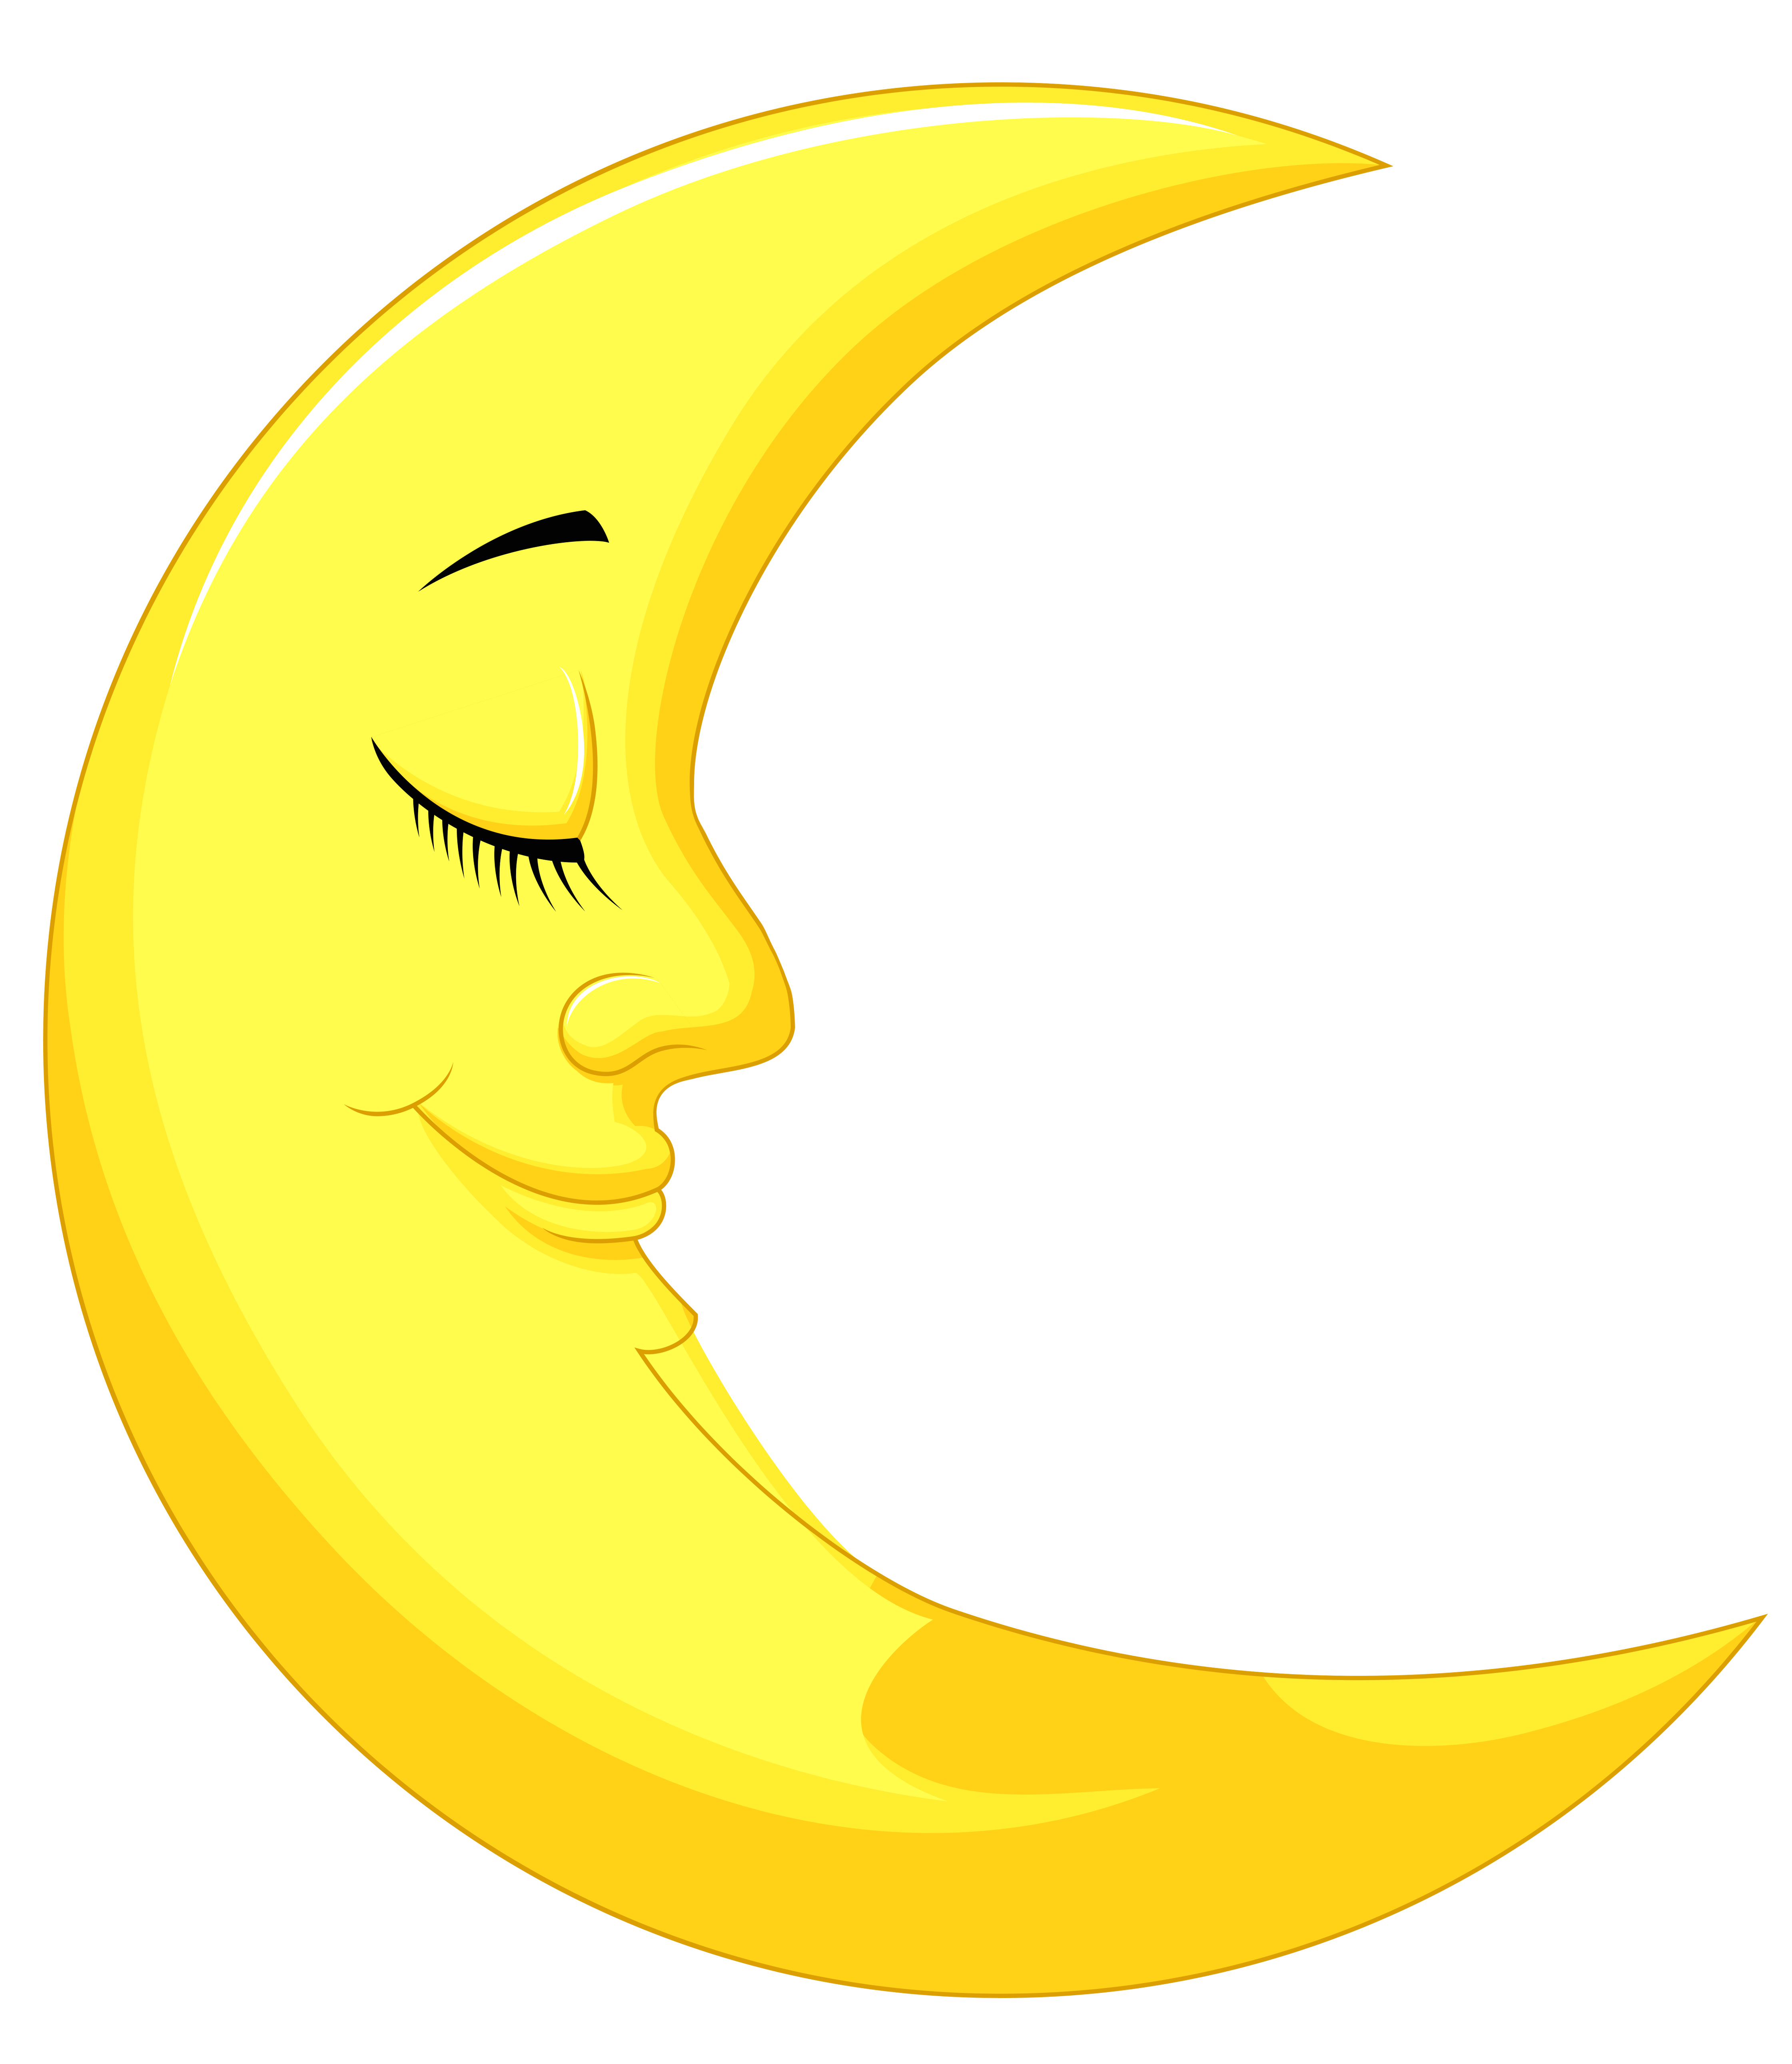 Smiling Moon Crescent PNG Images Transparent Background | PNG Play